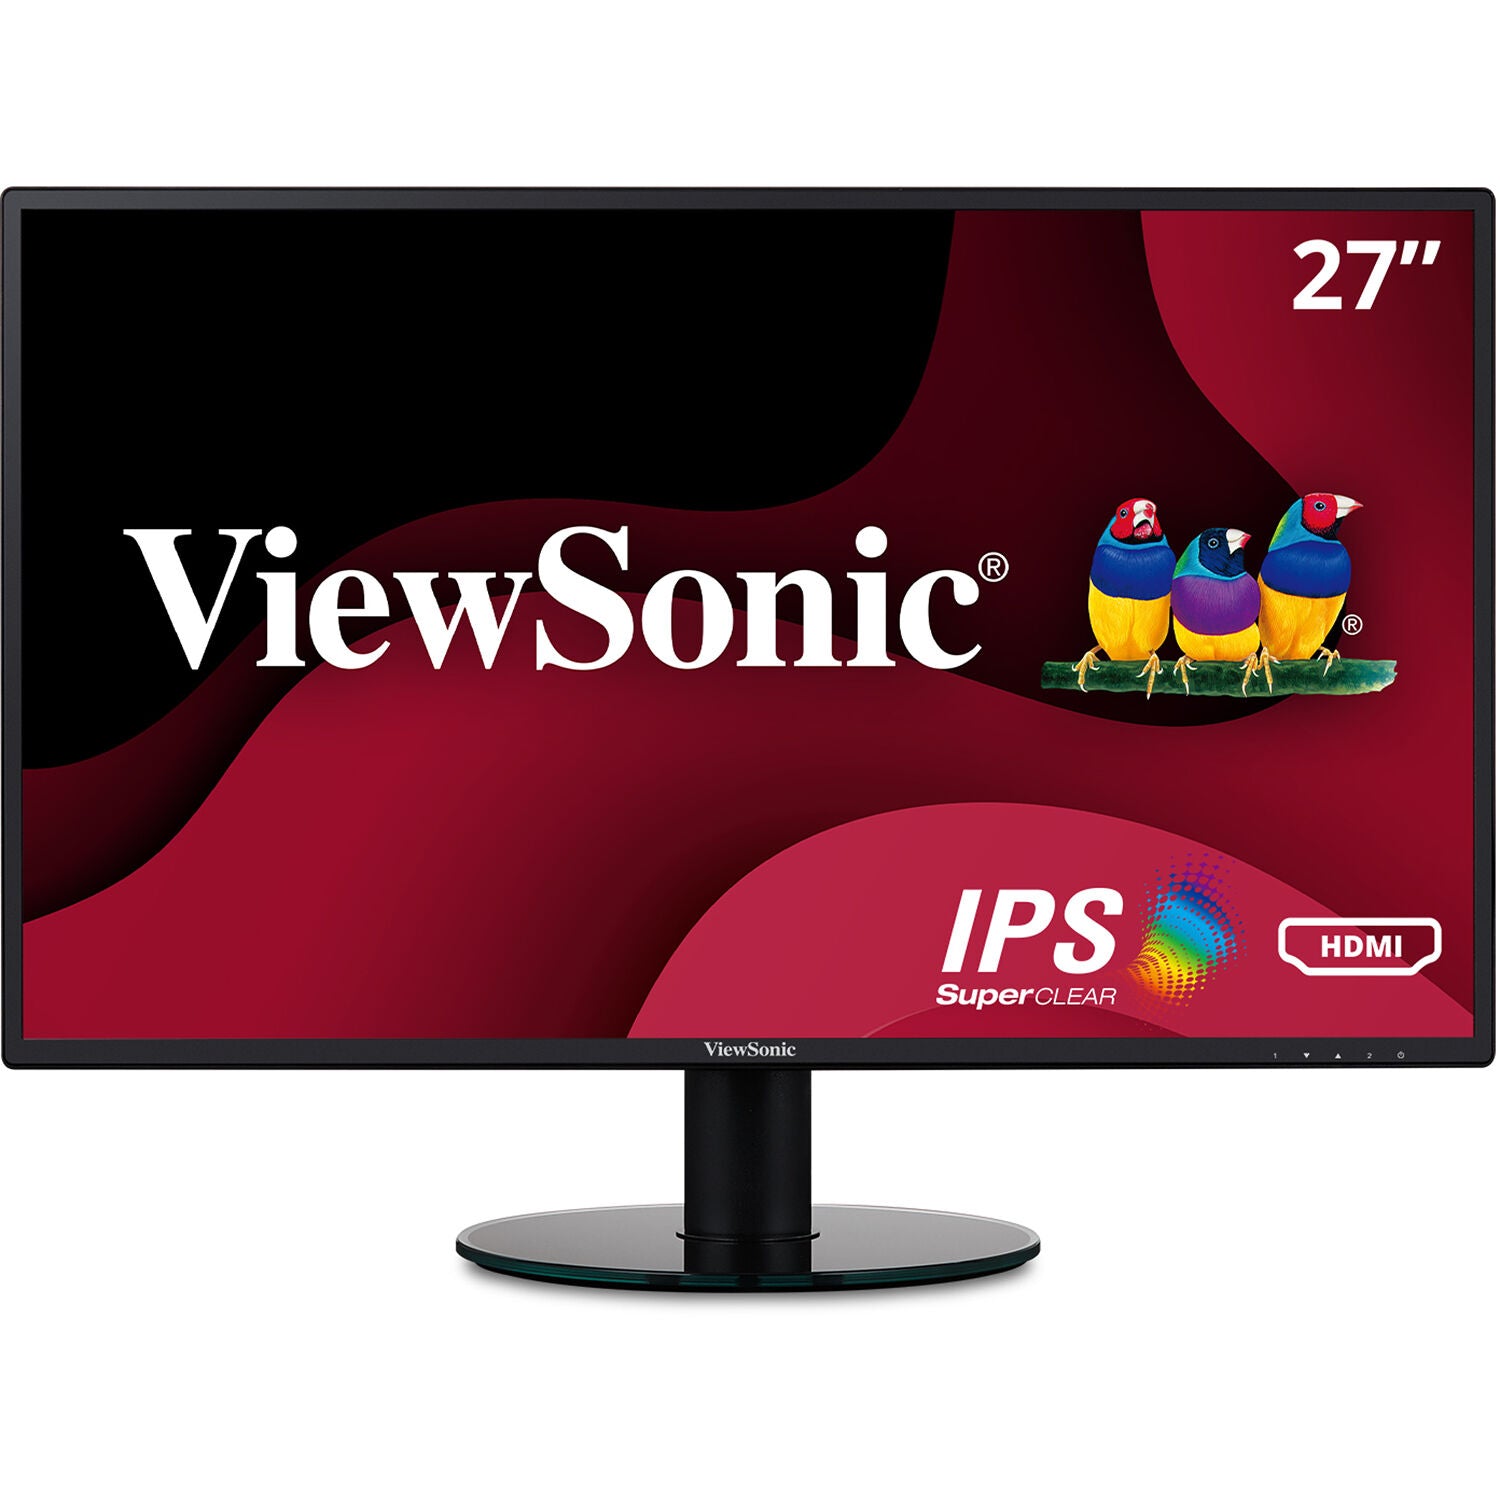 ViewSonic VA2719-SMH-R 27" IPS 1080p Frameless LED Monitor with HDMI and VGA Inputs for Home and Office - C Grade Refurbished